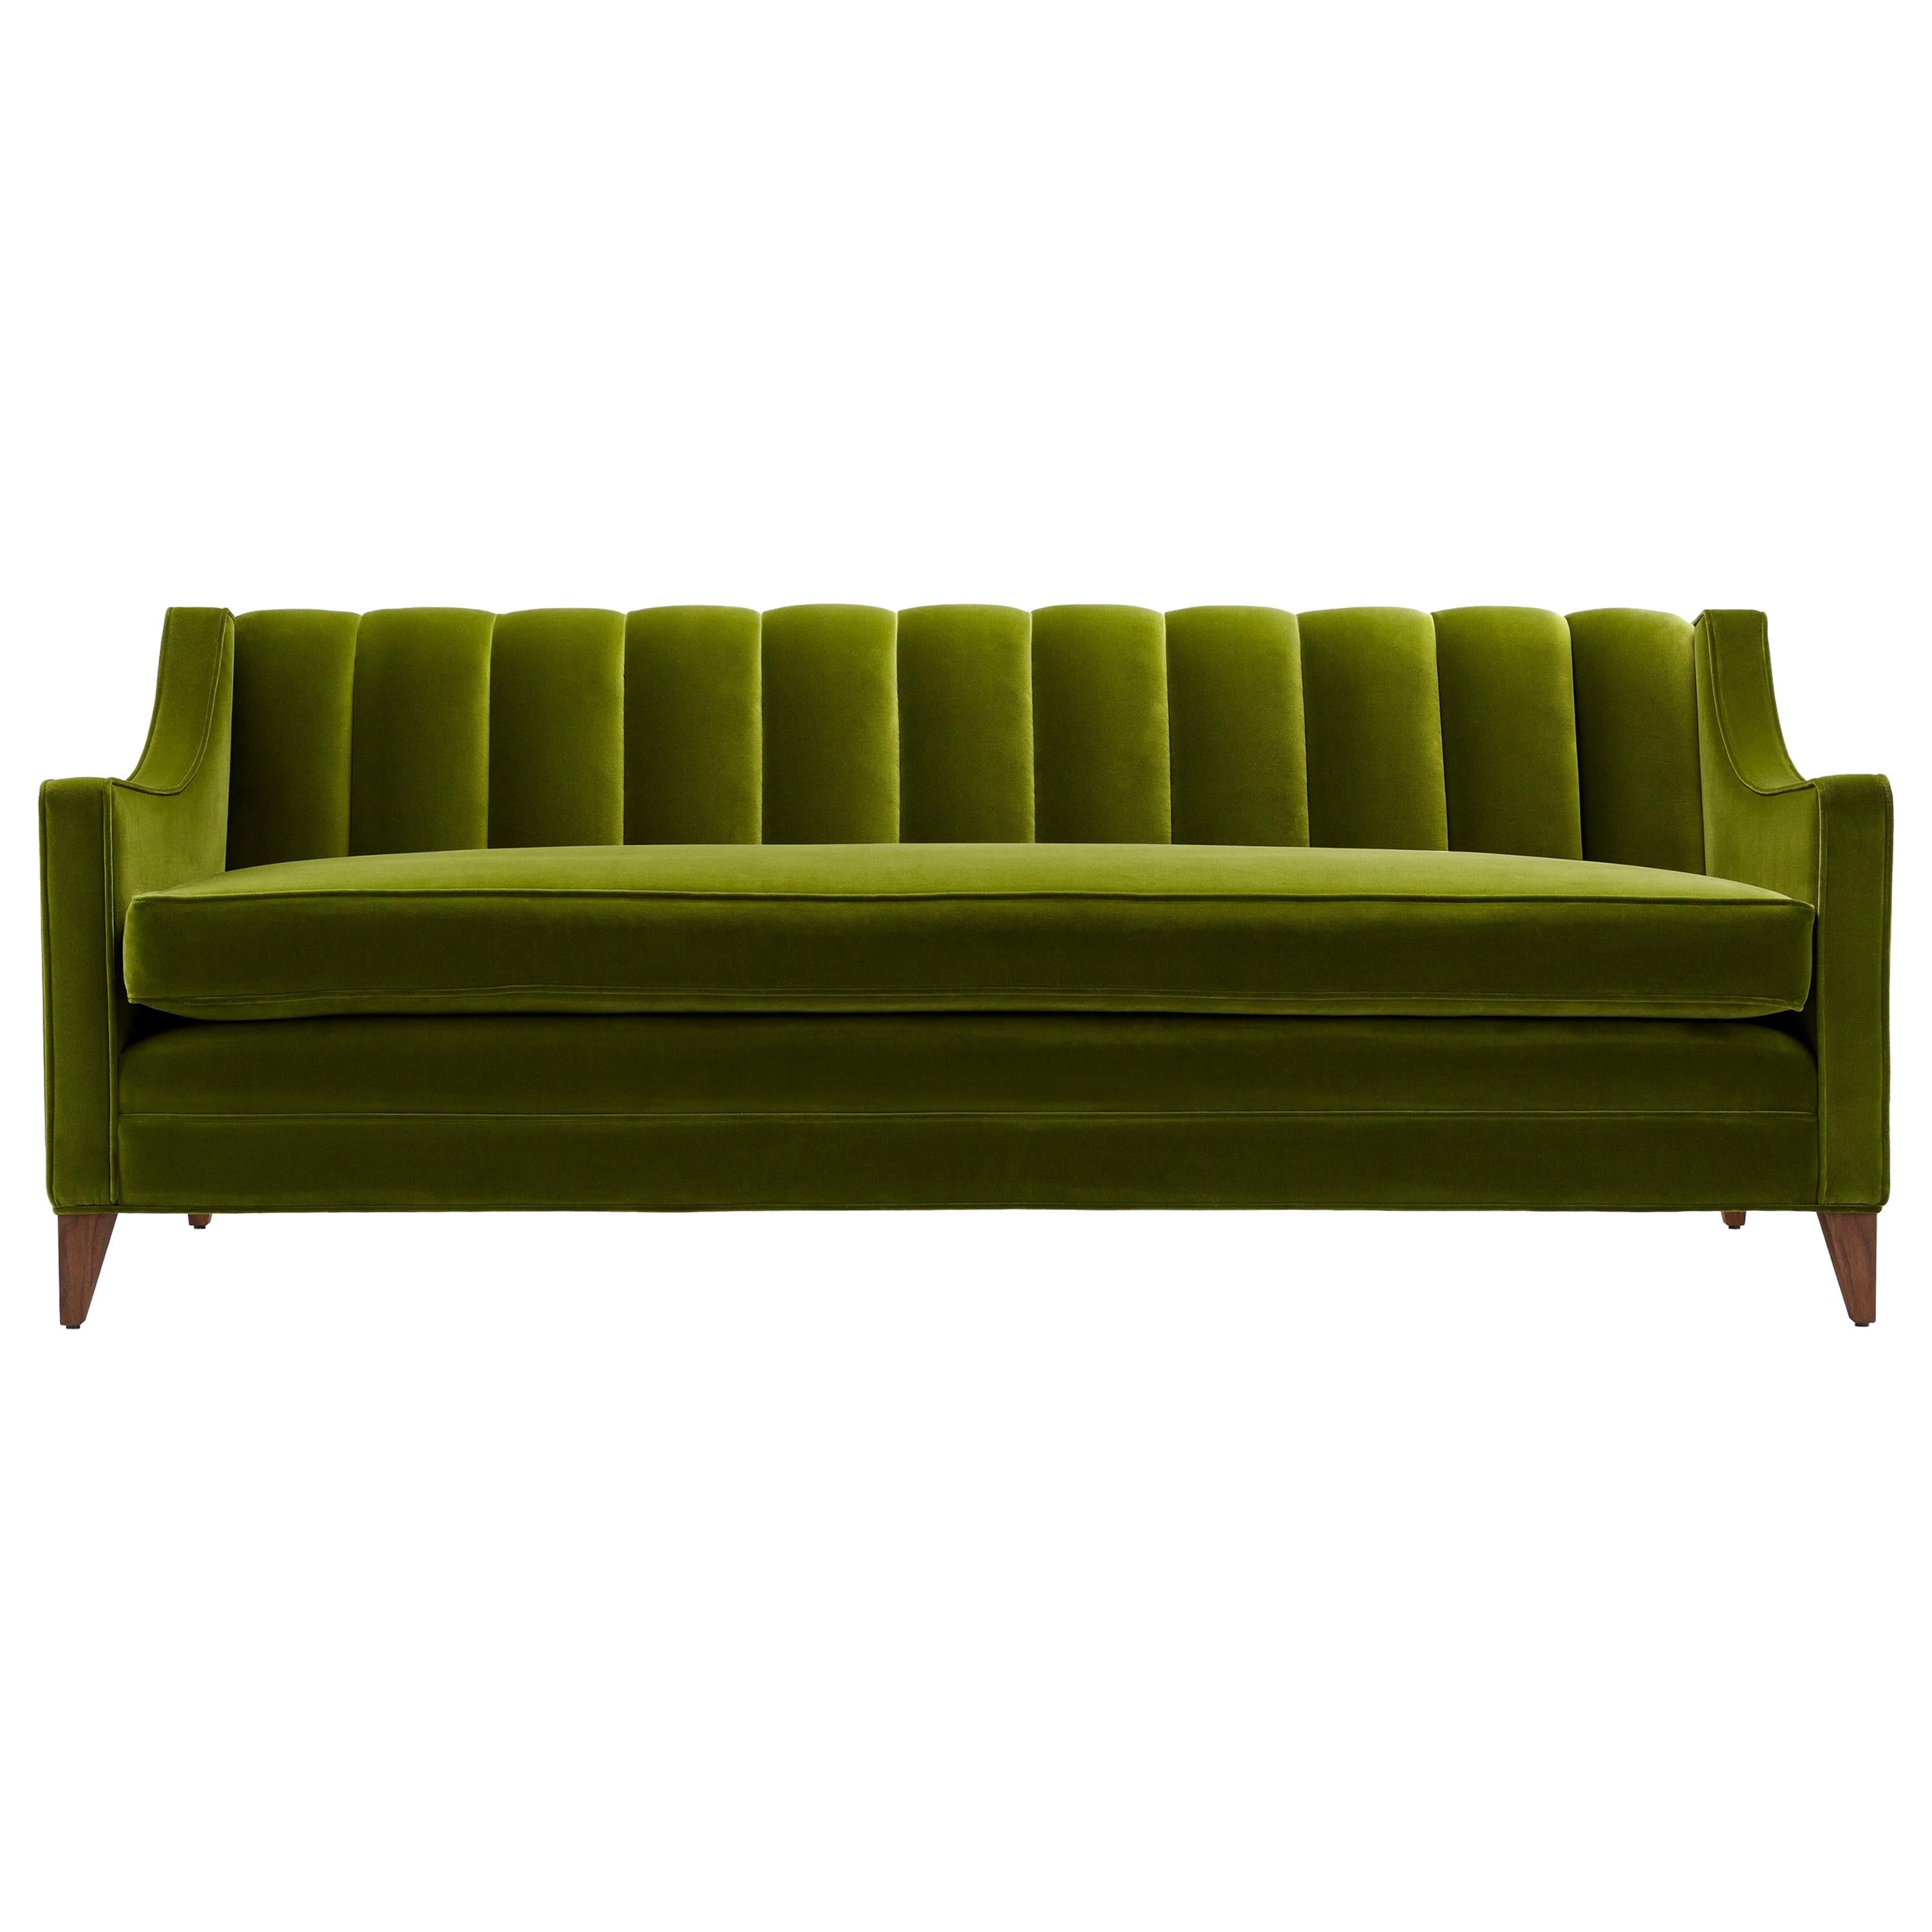 Contemporary Channeled Fleure Luxus Sofa in Velvet and Oak or Walnut Legs